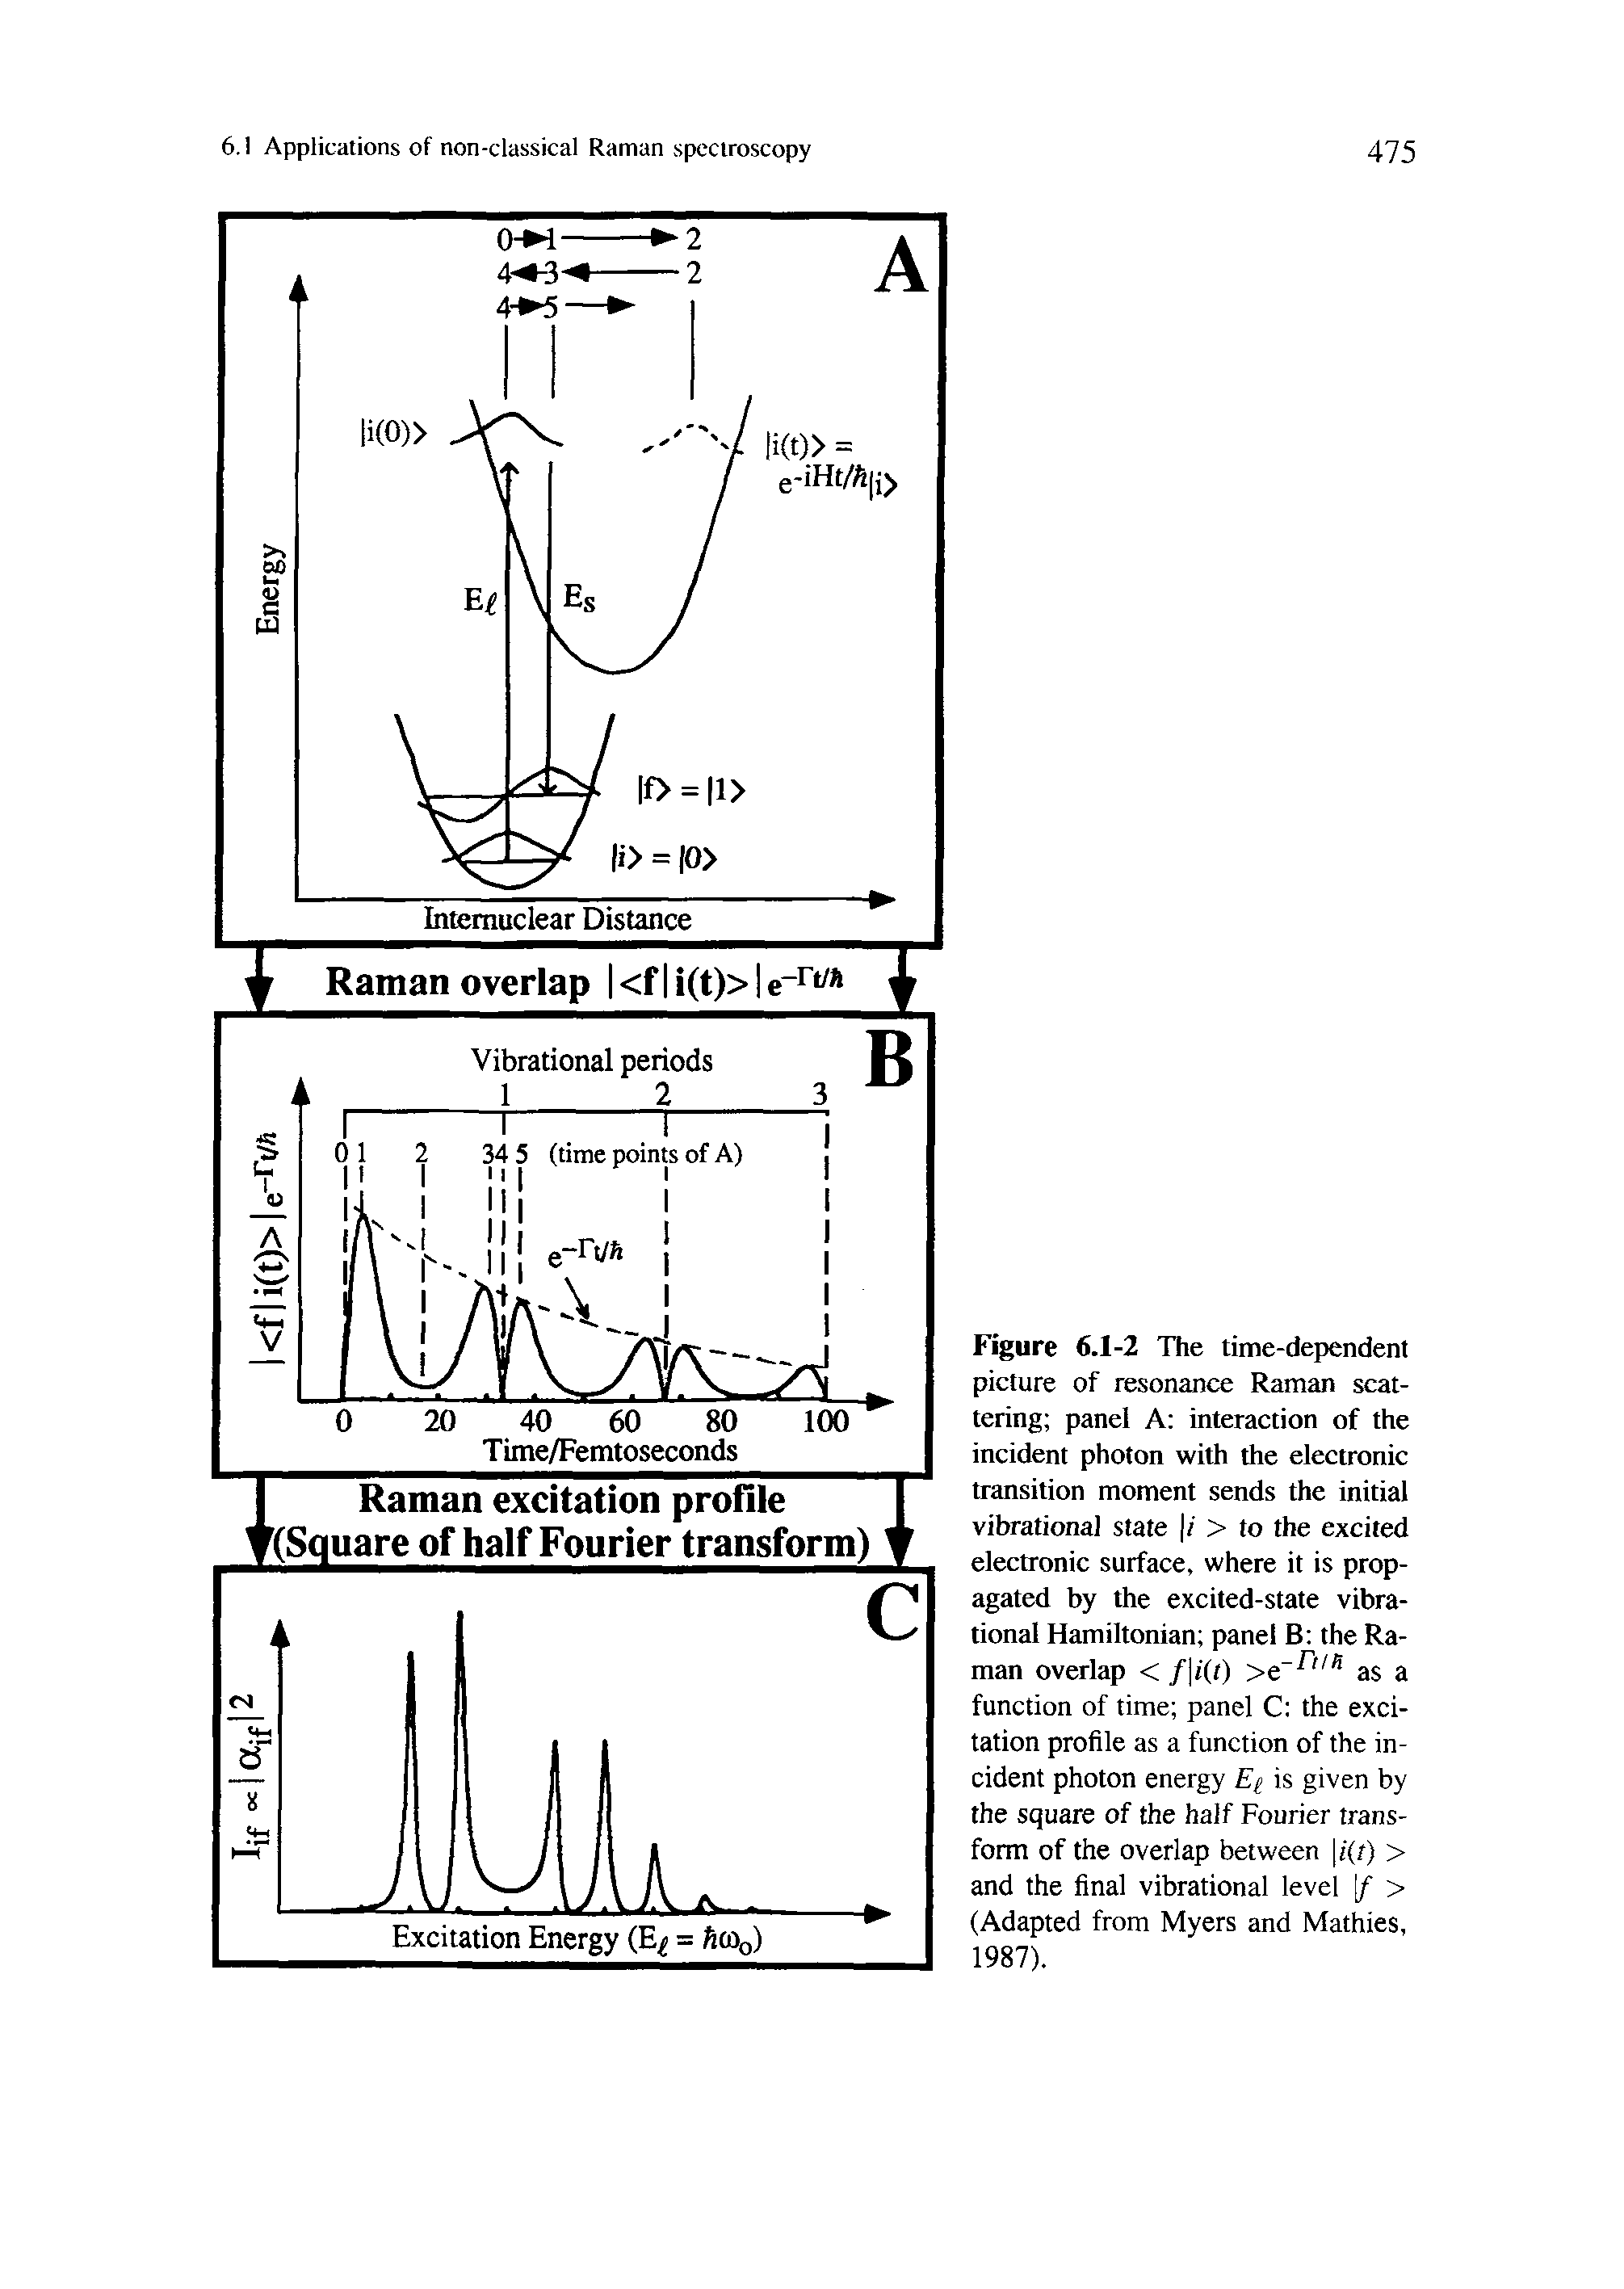 Figure 6.1-2 The time-dependent picture of resonance Raman scattering panel A interaction of the incident photon with the electronic transition moment sends the initial vibrational state / > to the excited electronic surface, where it is propagated by the excited-state vibrational Hamiltonian panel B the Raman overlap < /li(i) as a...